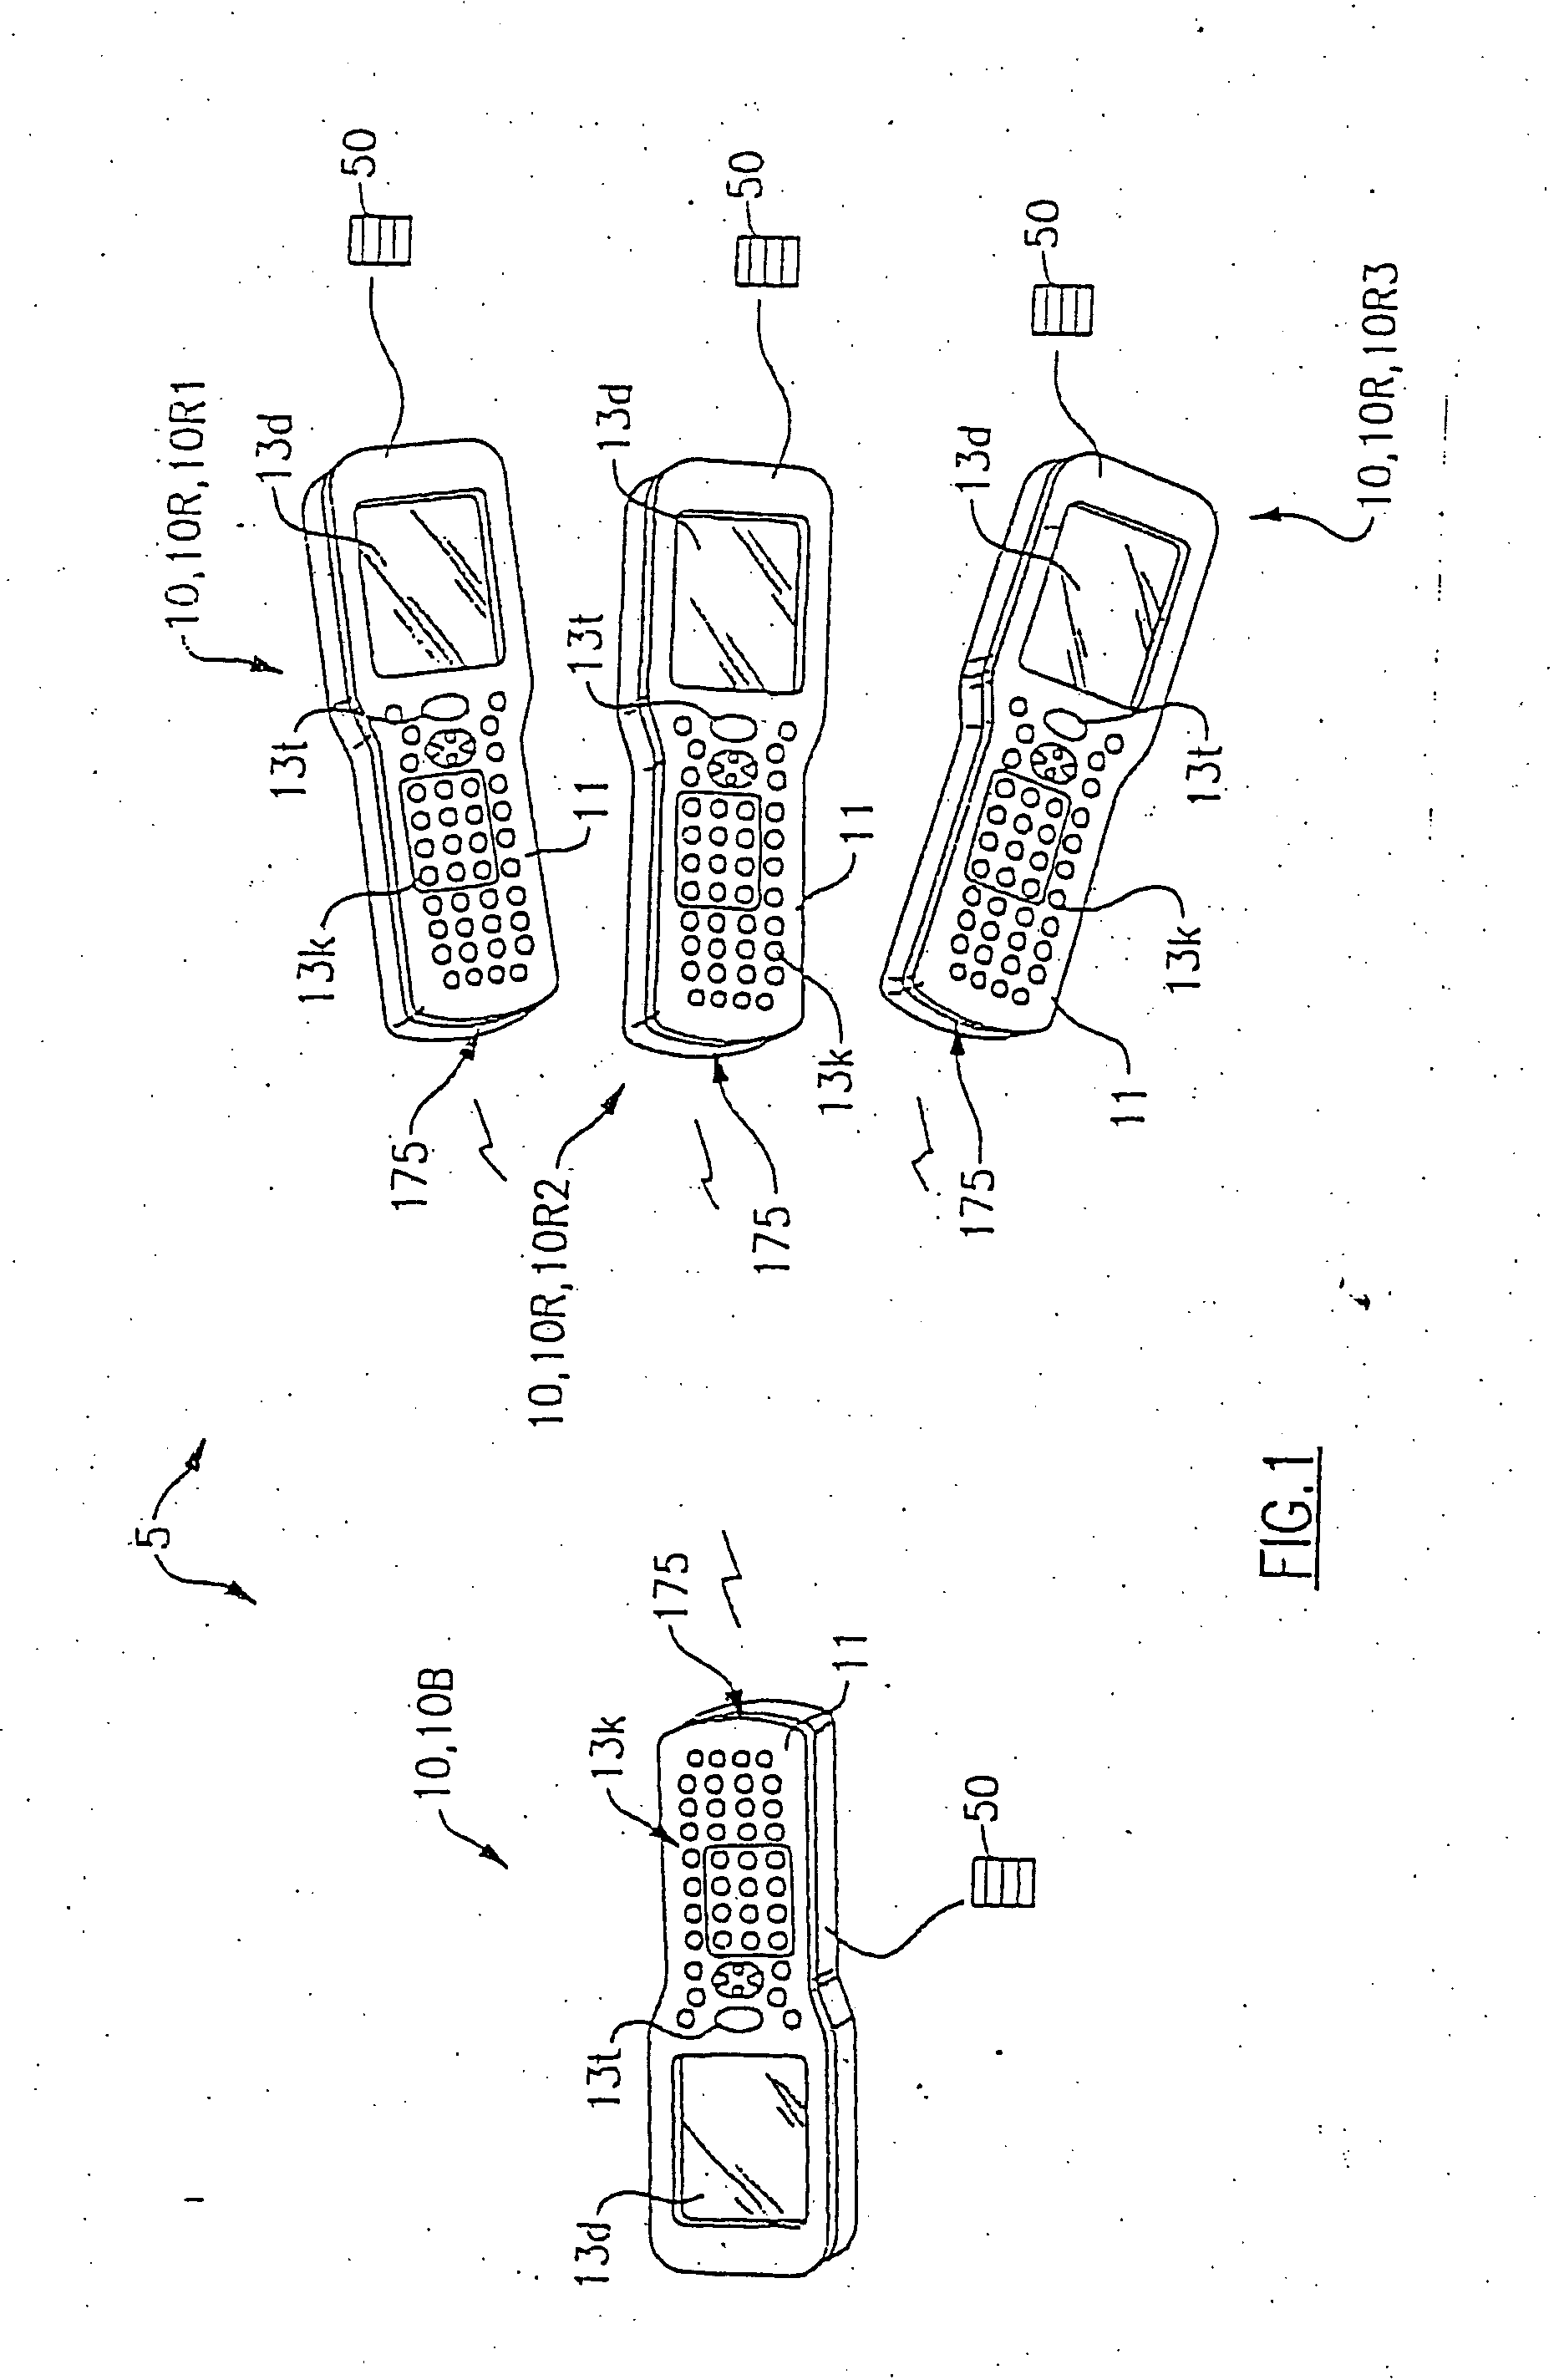 Memory data copying system for devices